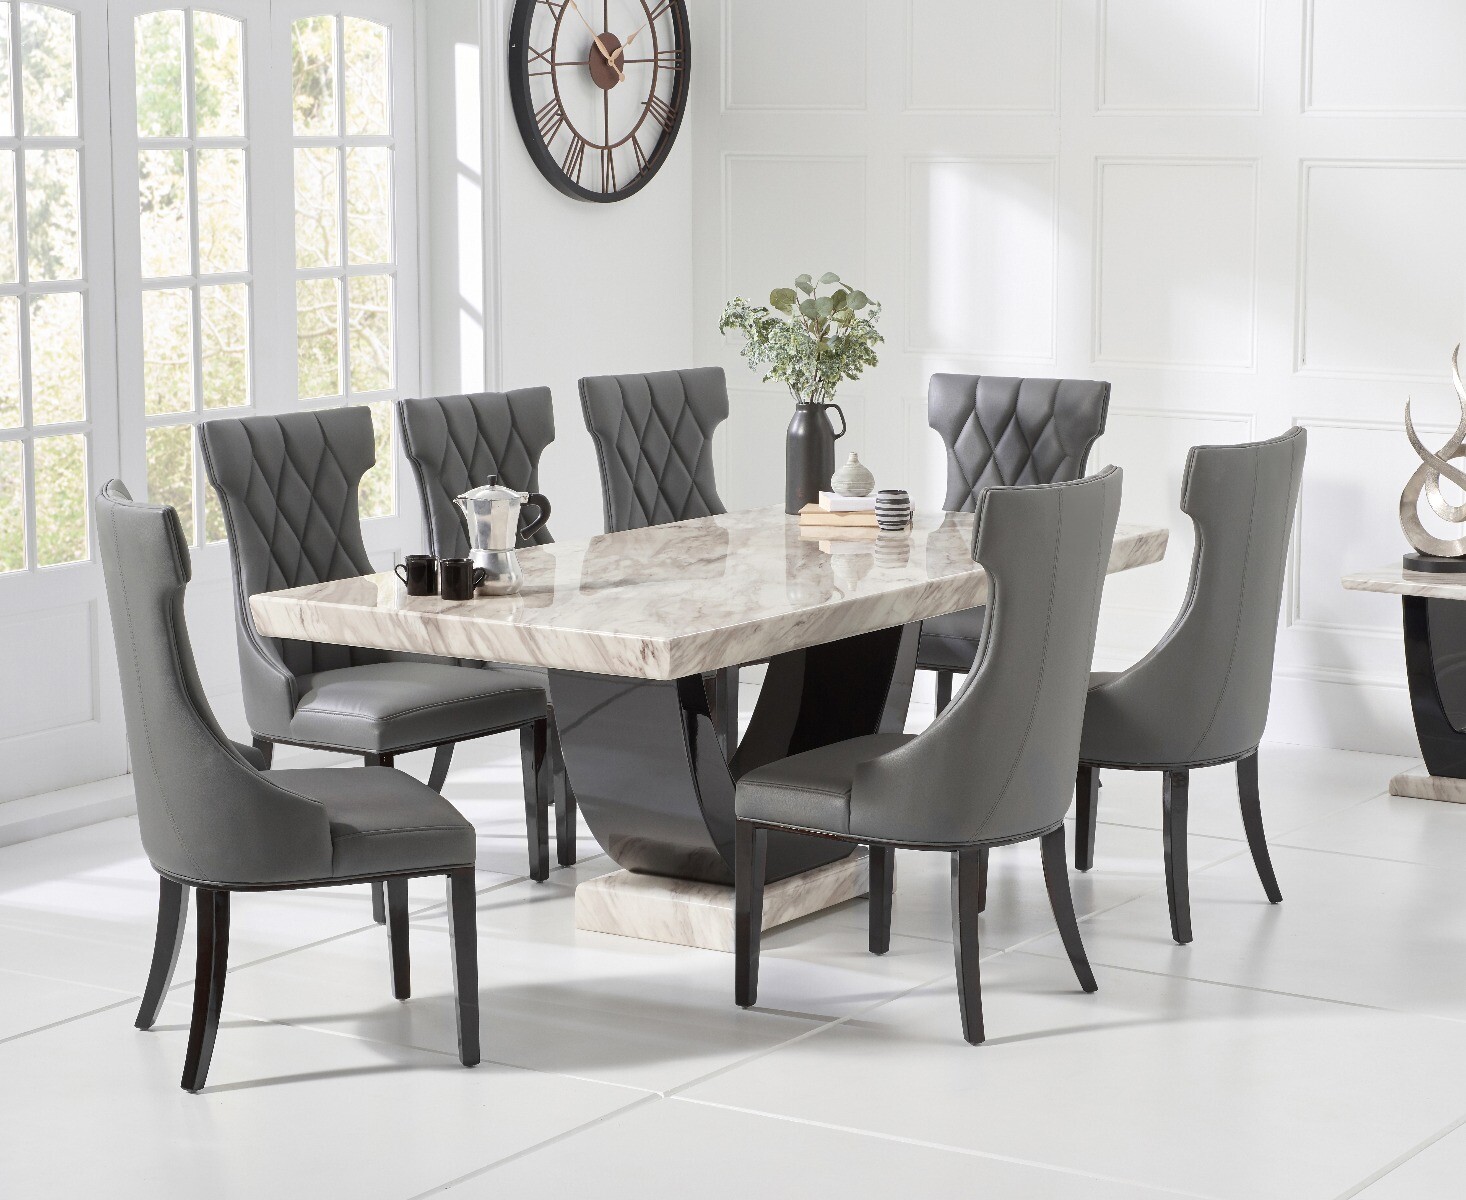 Photo 1 of Novara 200cm cream and black pedestal marble dining table with 6 grey sophia chairs